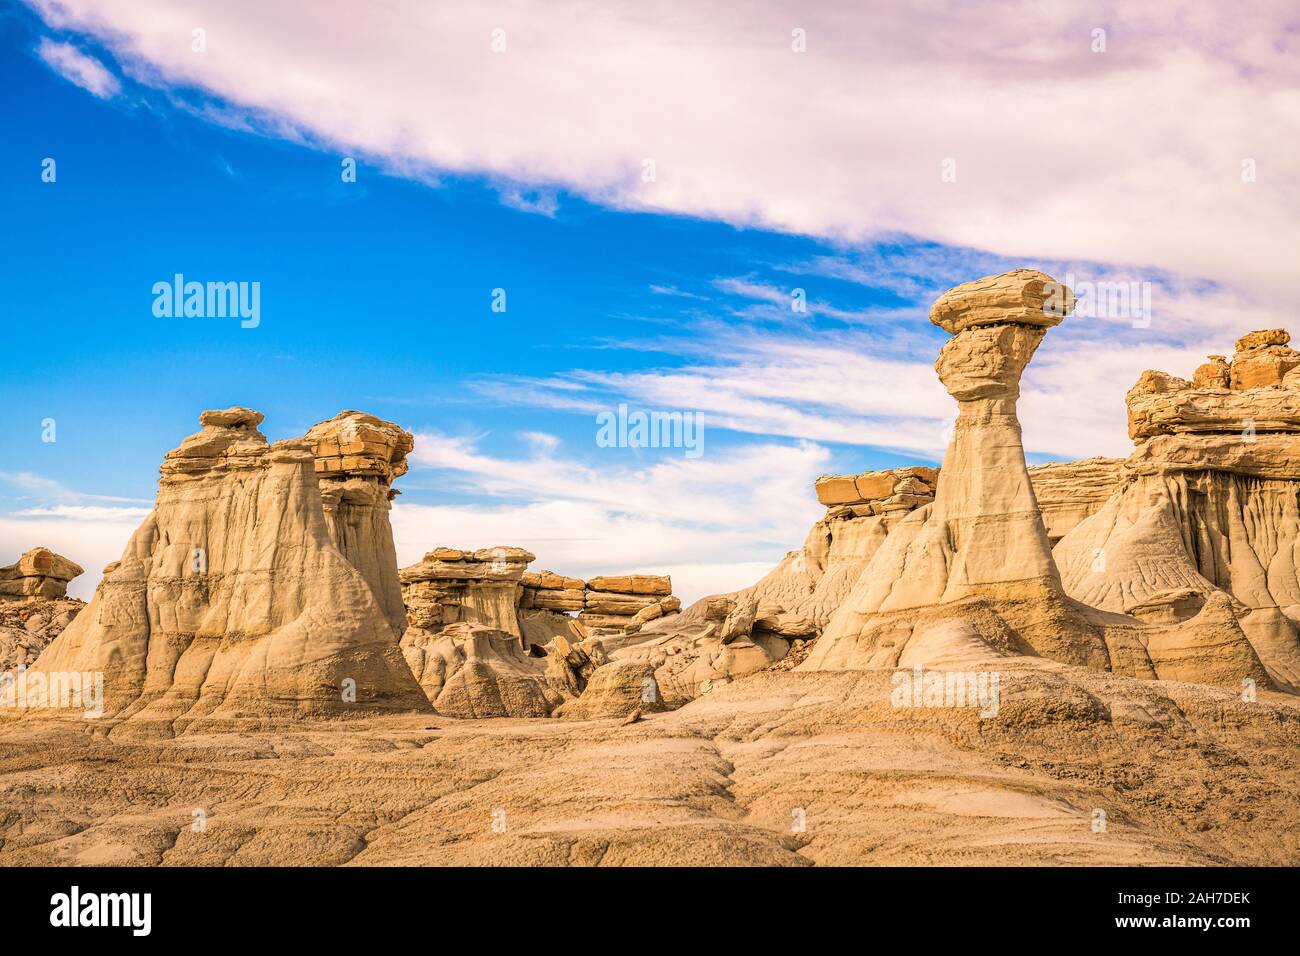 Bisti Badlands, New Mexico, USA hoodoo formations rocheuses. Banque D'Images